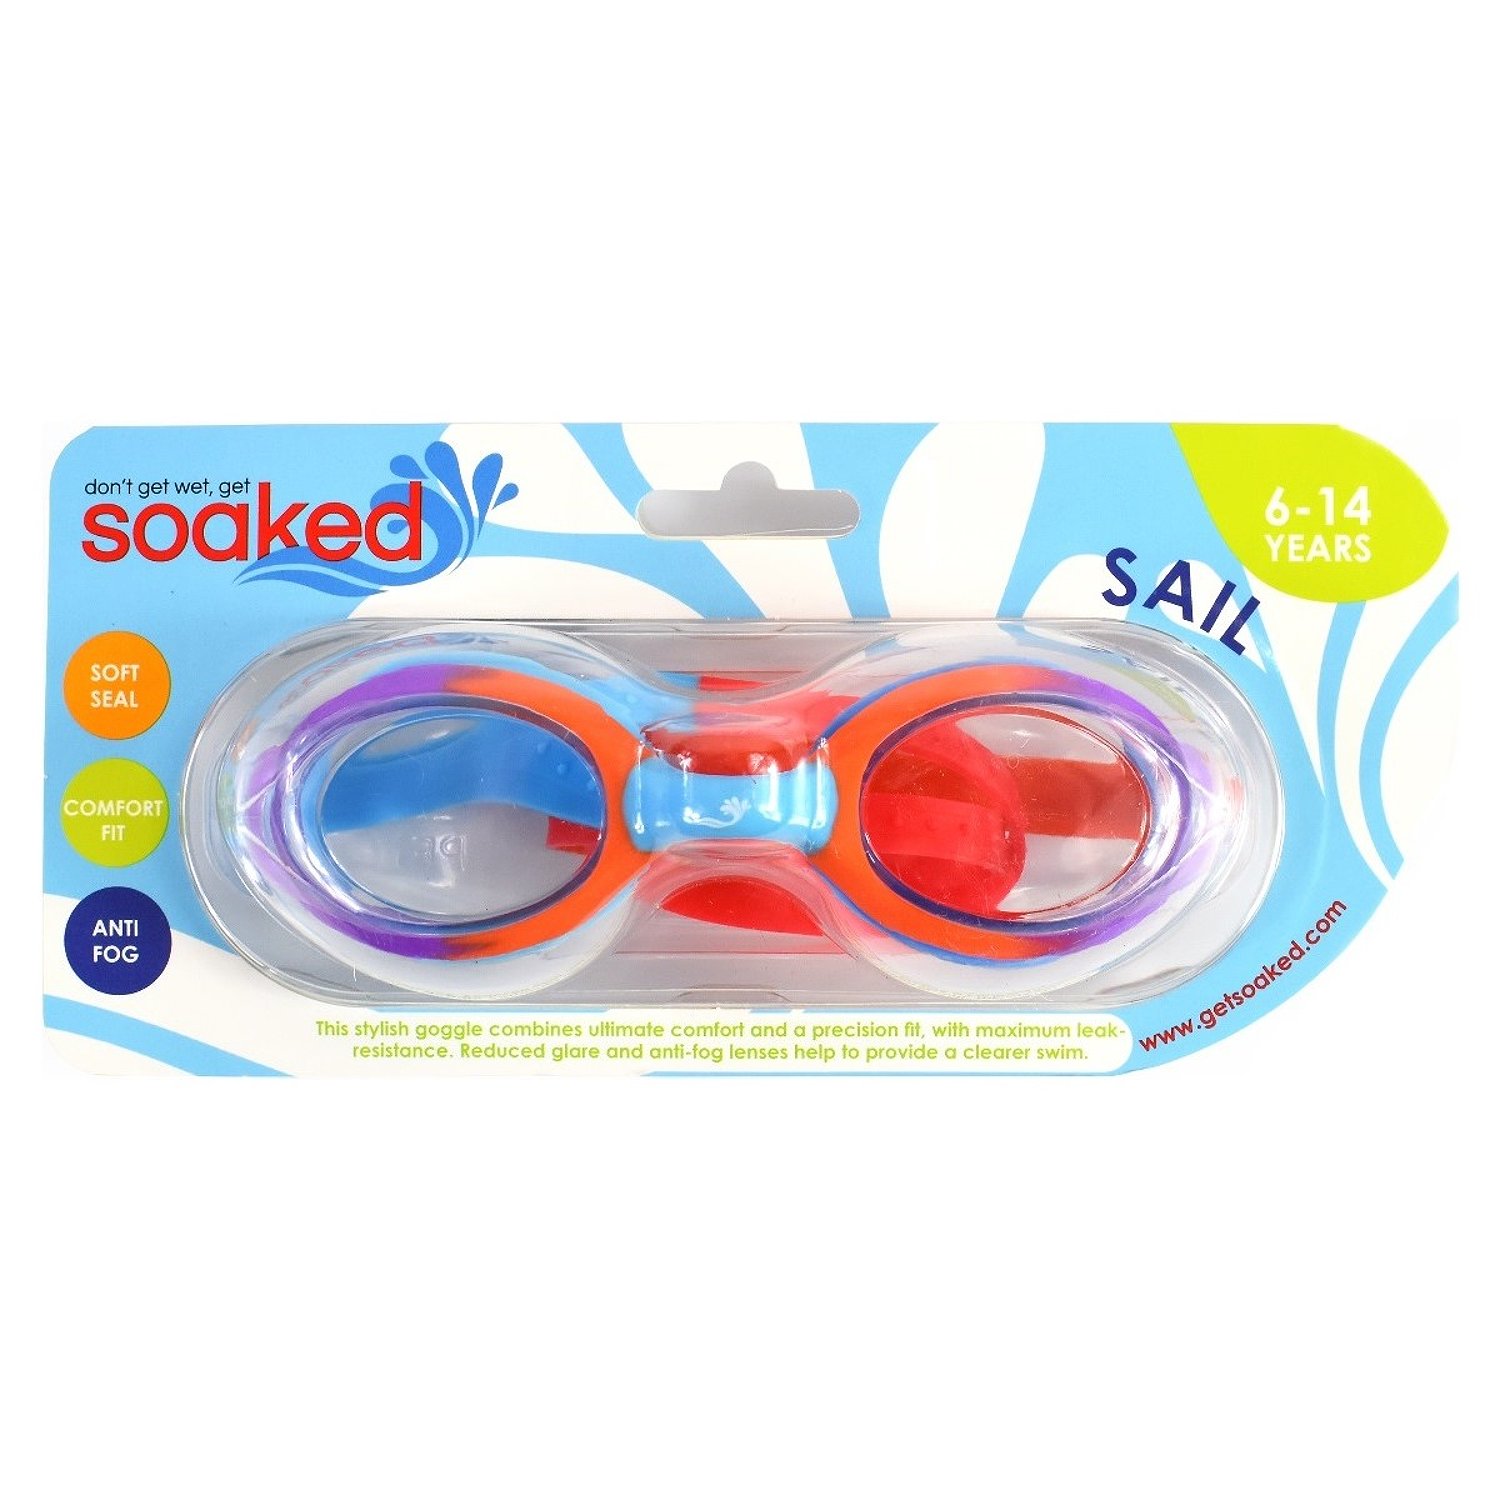 Splash About Sail Goggles Soaked Swim Junior Child Infant 6-14 Year Soft Seal 